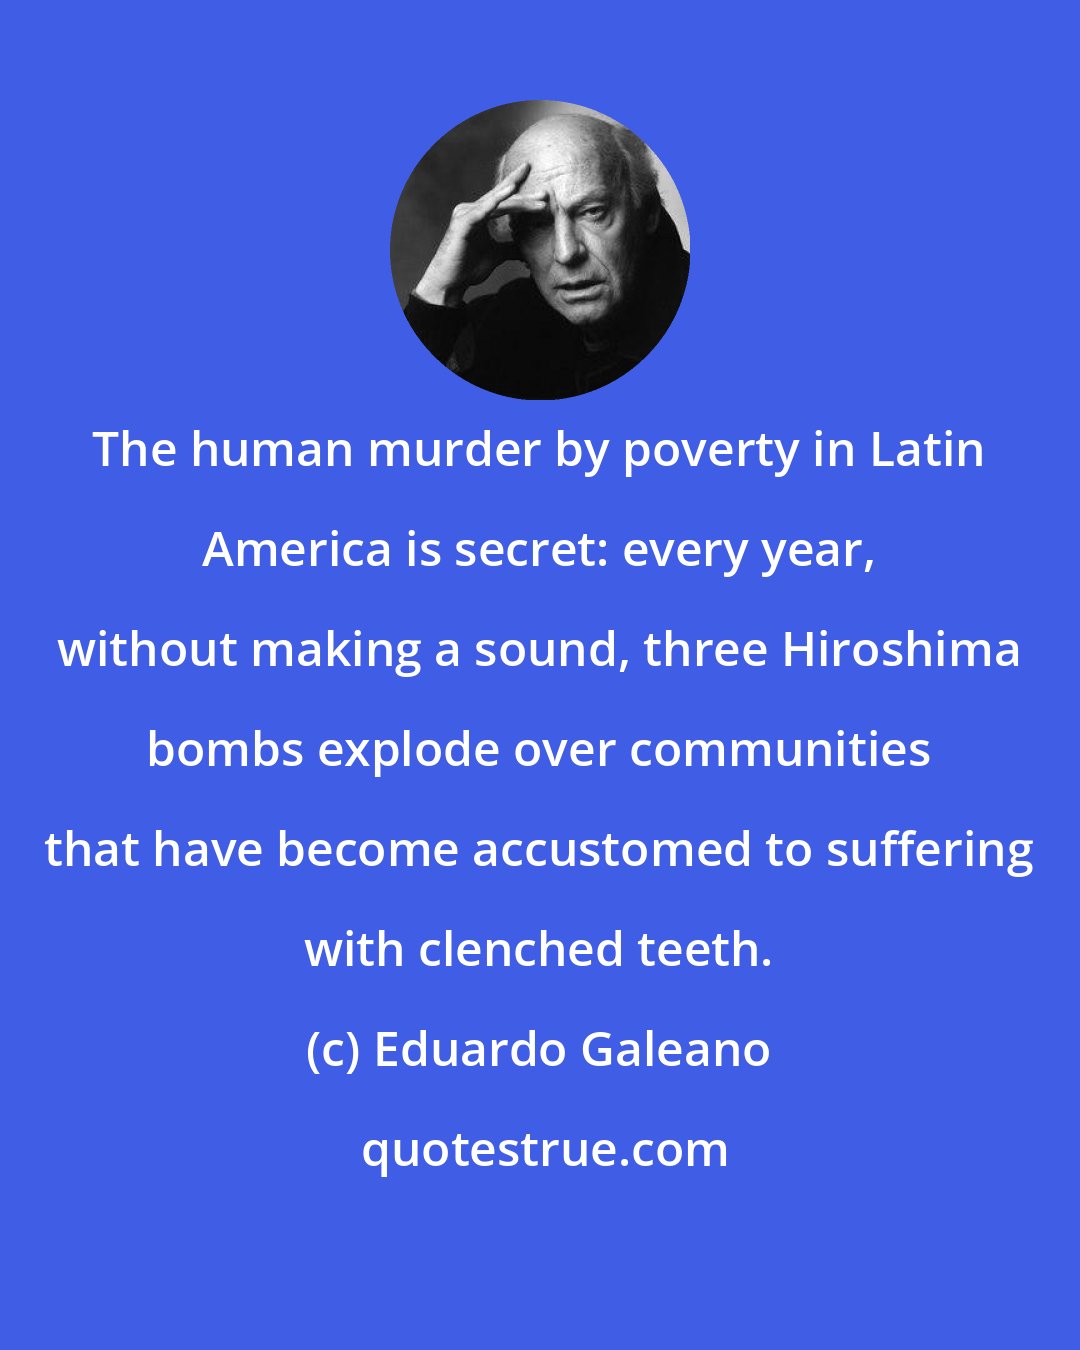 Eduardo Galeano: The human murder by poverty in Latin America is secret: every year, without making a sound, three Hiroshima bombs explode over communities that have become accustomed to suffering with clenched teeth.